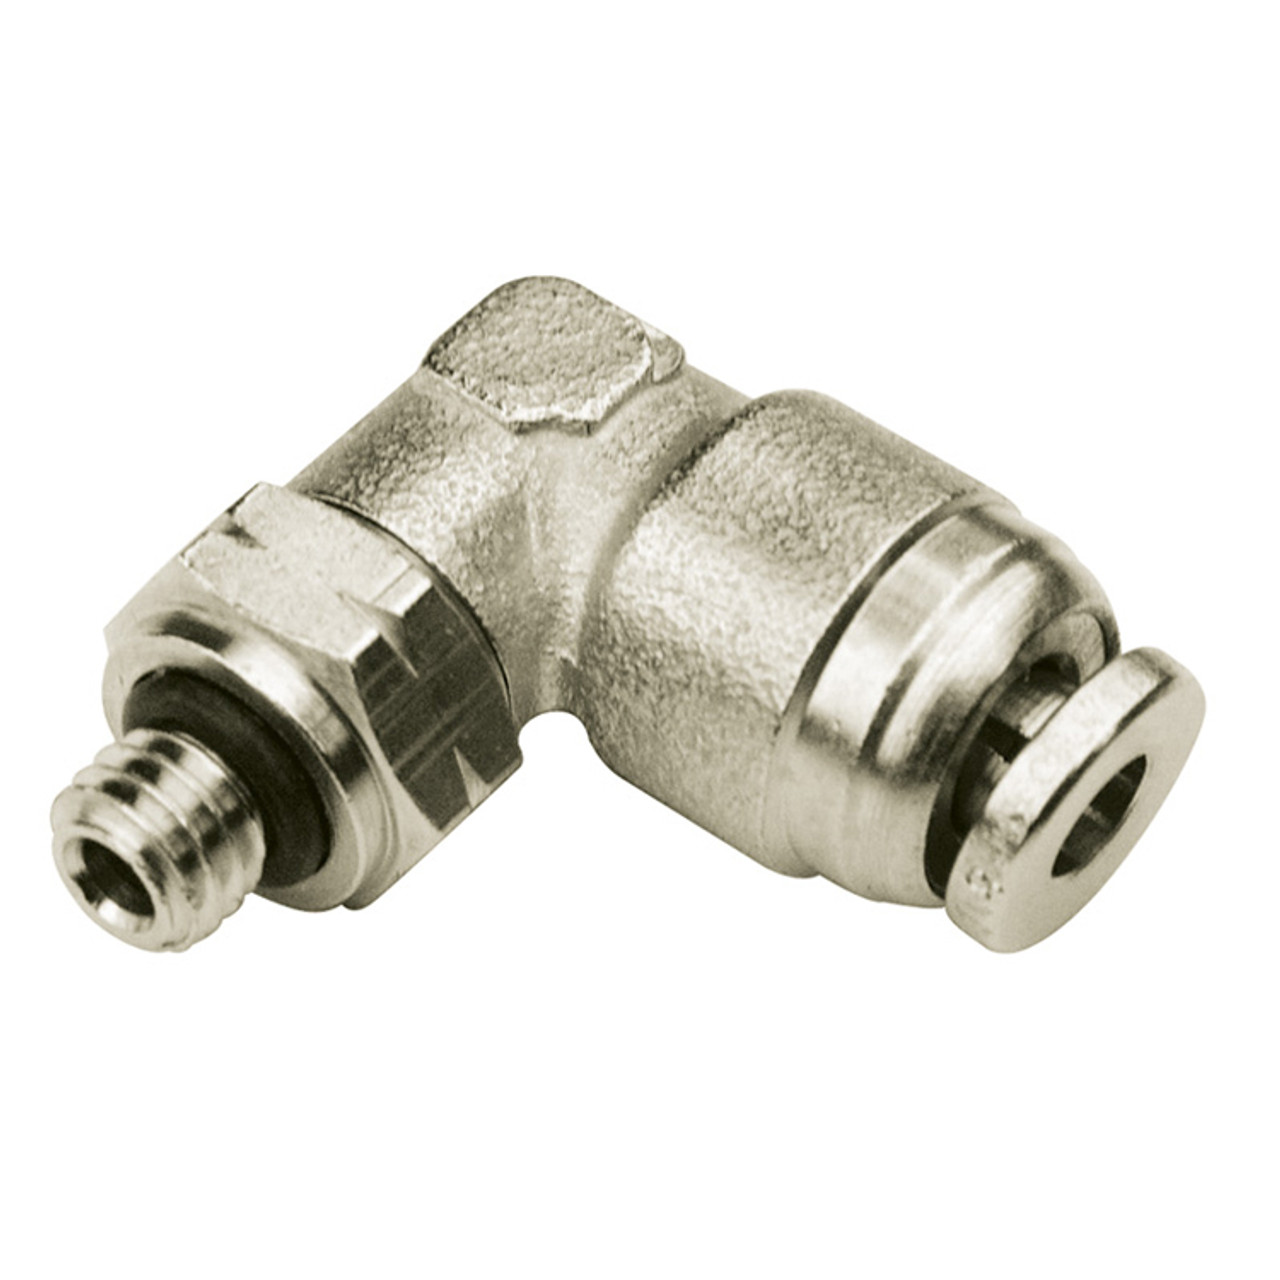 10-32 x 1/4" Nickel Plated Brass Male Thread - Push-To-Connect 90° Elbow   G6096-UNF-04